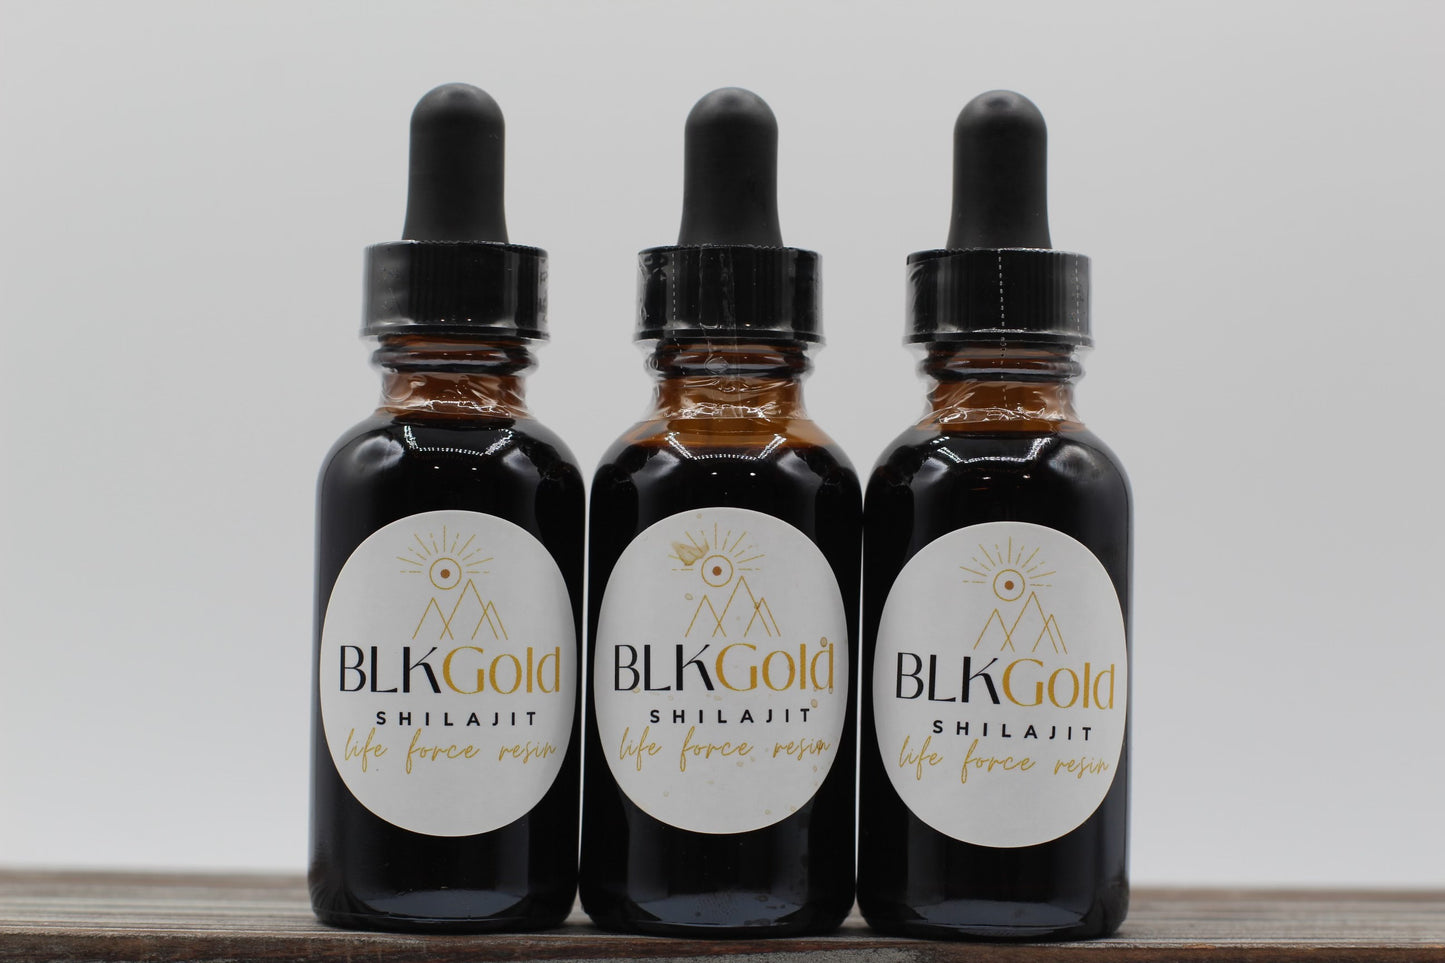 Black Gold: limited time Altai Mountain Shilajit tonic with Essence of Chaga